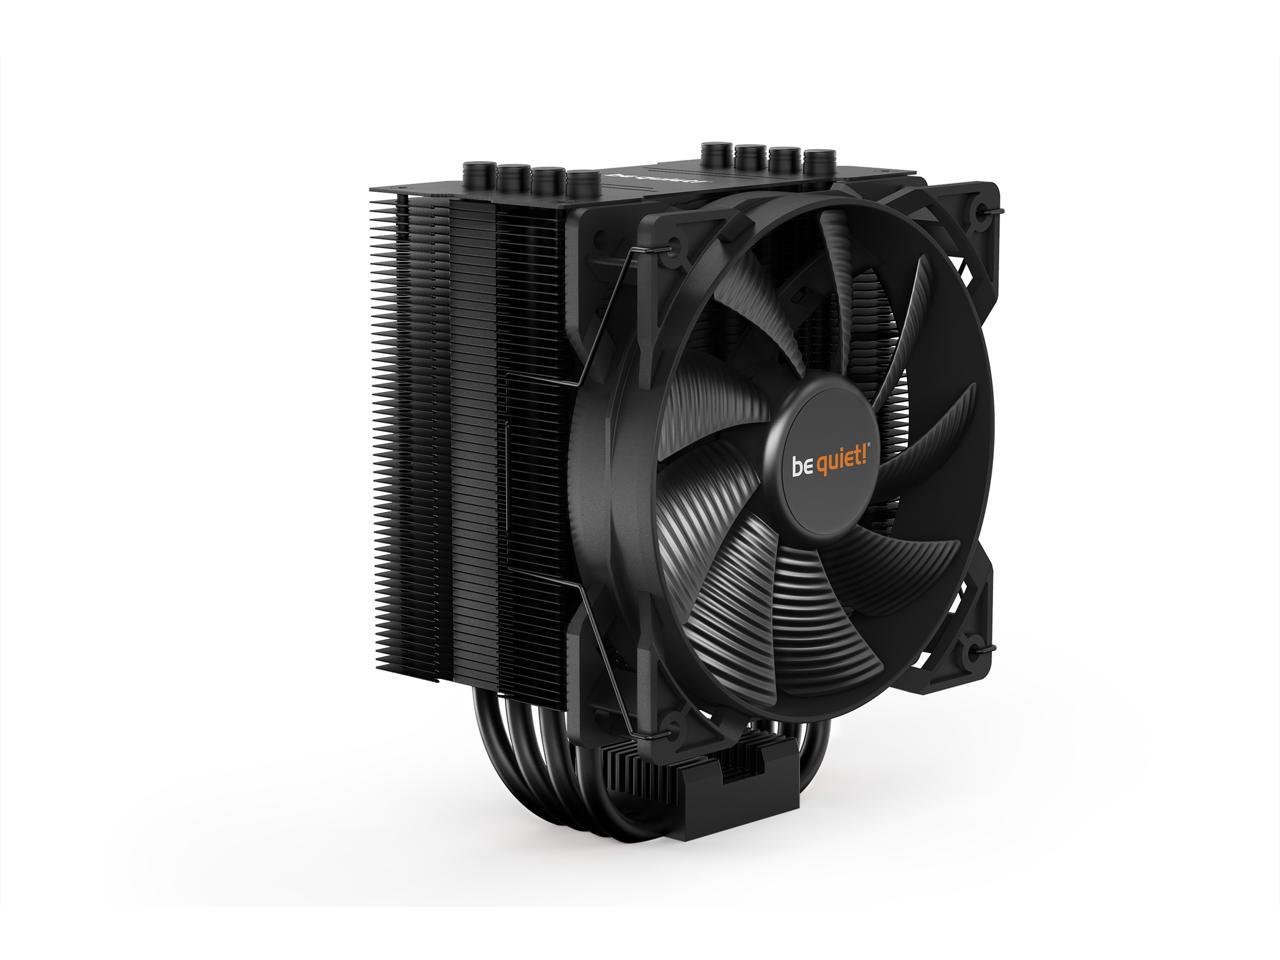 be quiet! Pure Rock 2 Black, CPU cooler, 150W TDP, incl. Pure Wings 2 120mm PWM fan, HDT technology